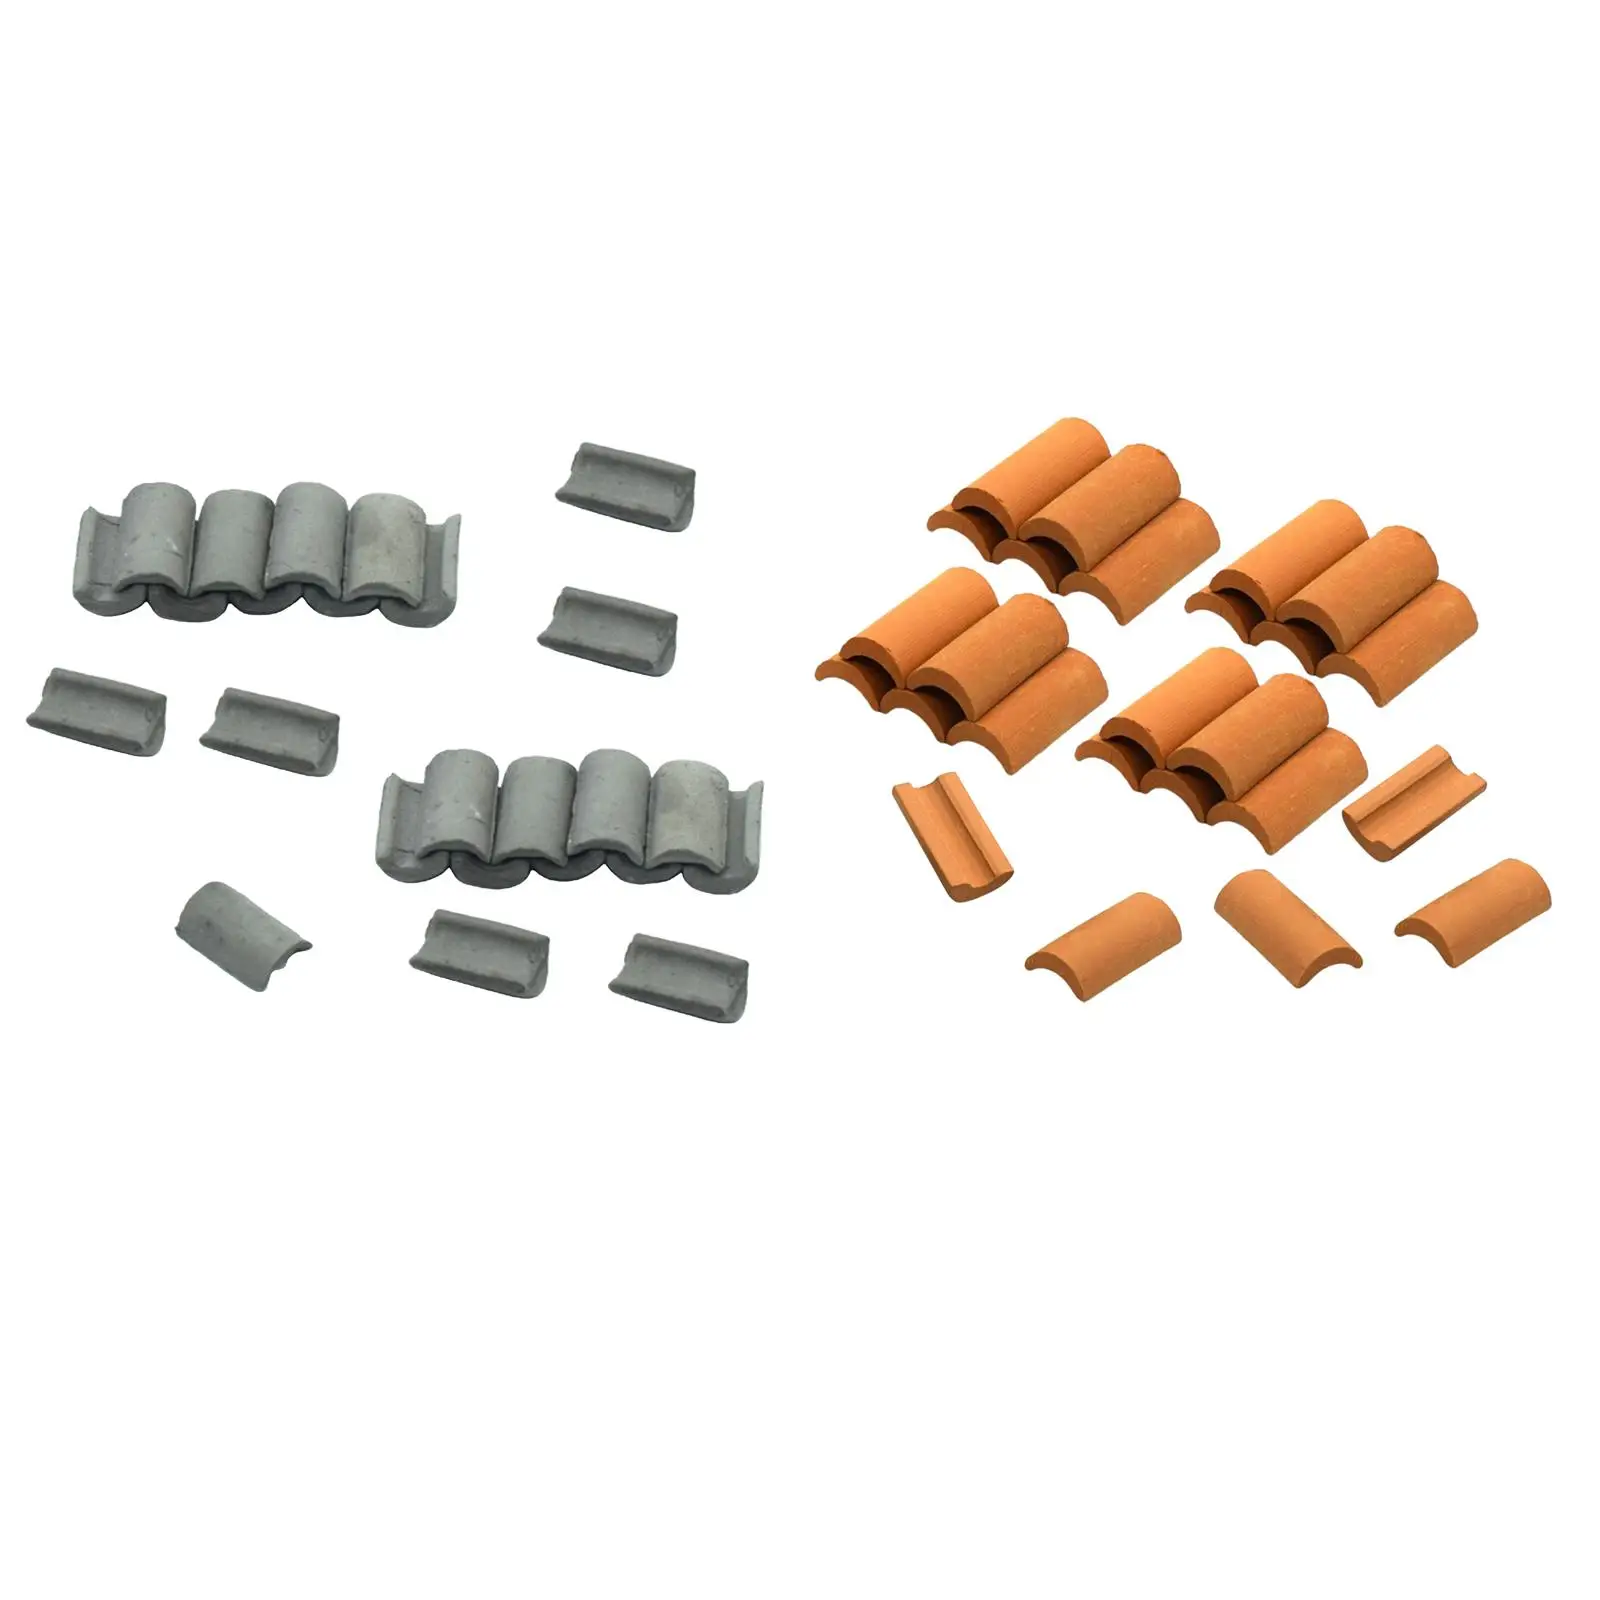 

25 Pieces Simulation Mini Roof Tiles Figurine Tiles Building Set Pottery Clay for Dollhouse Table Role